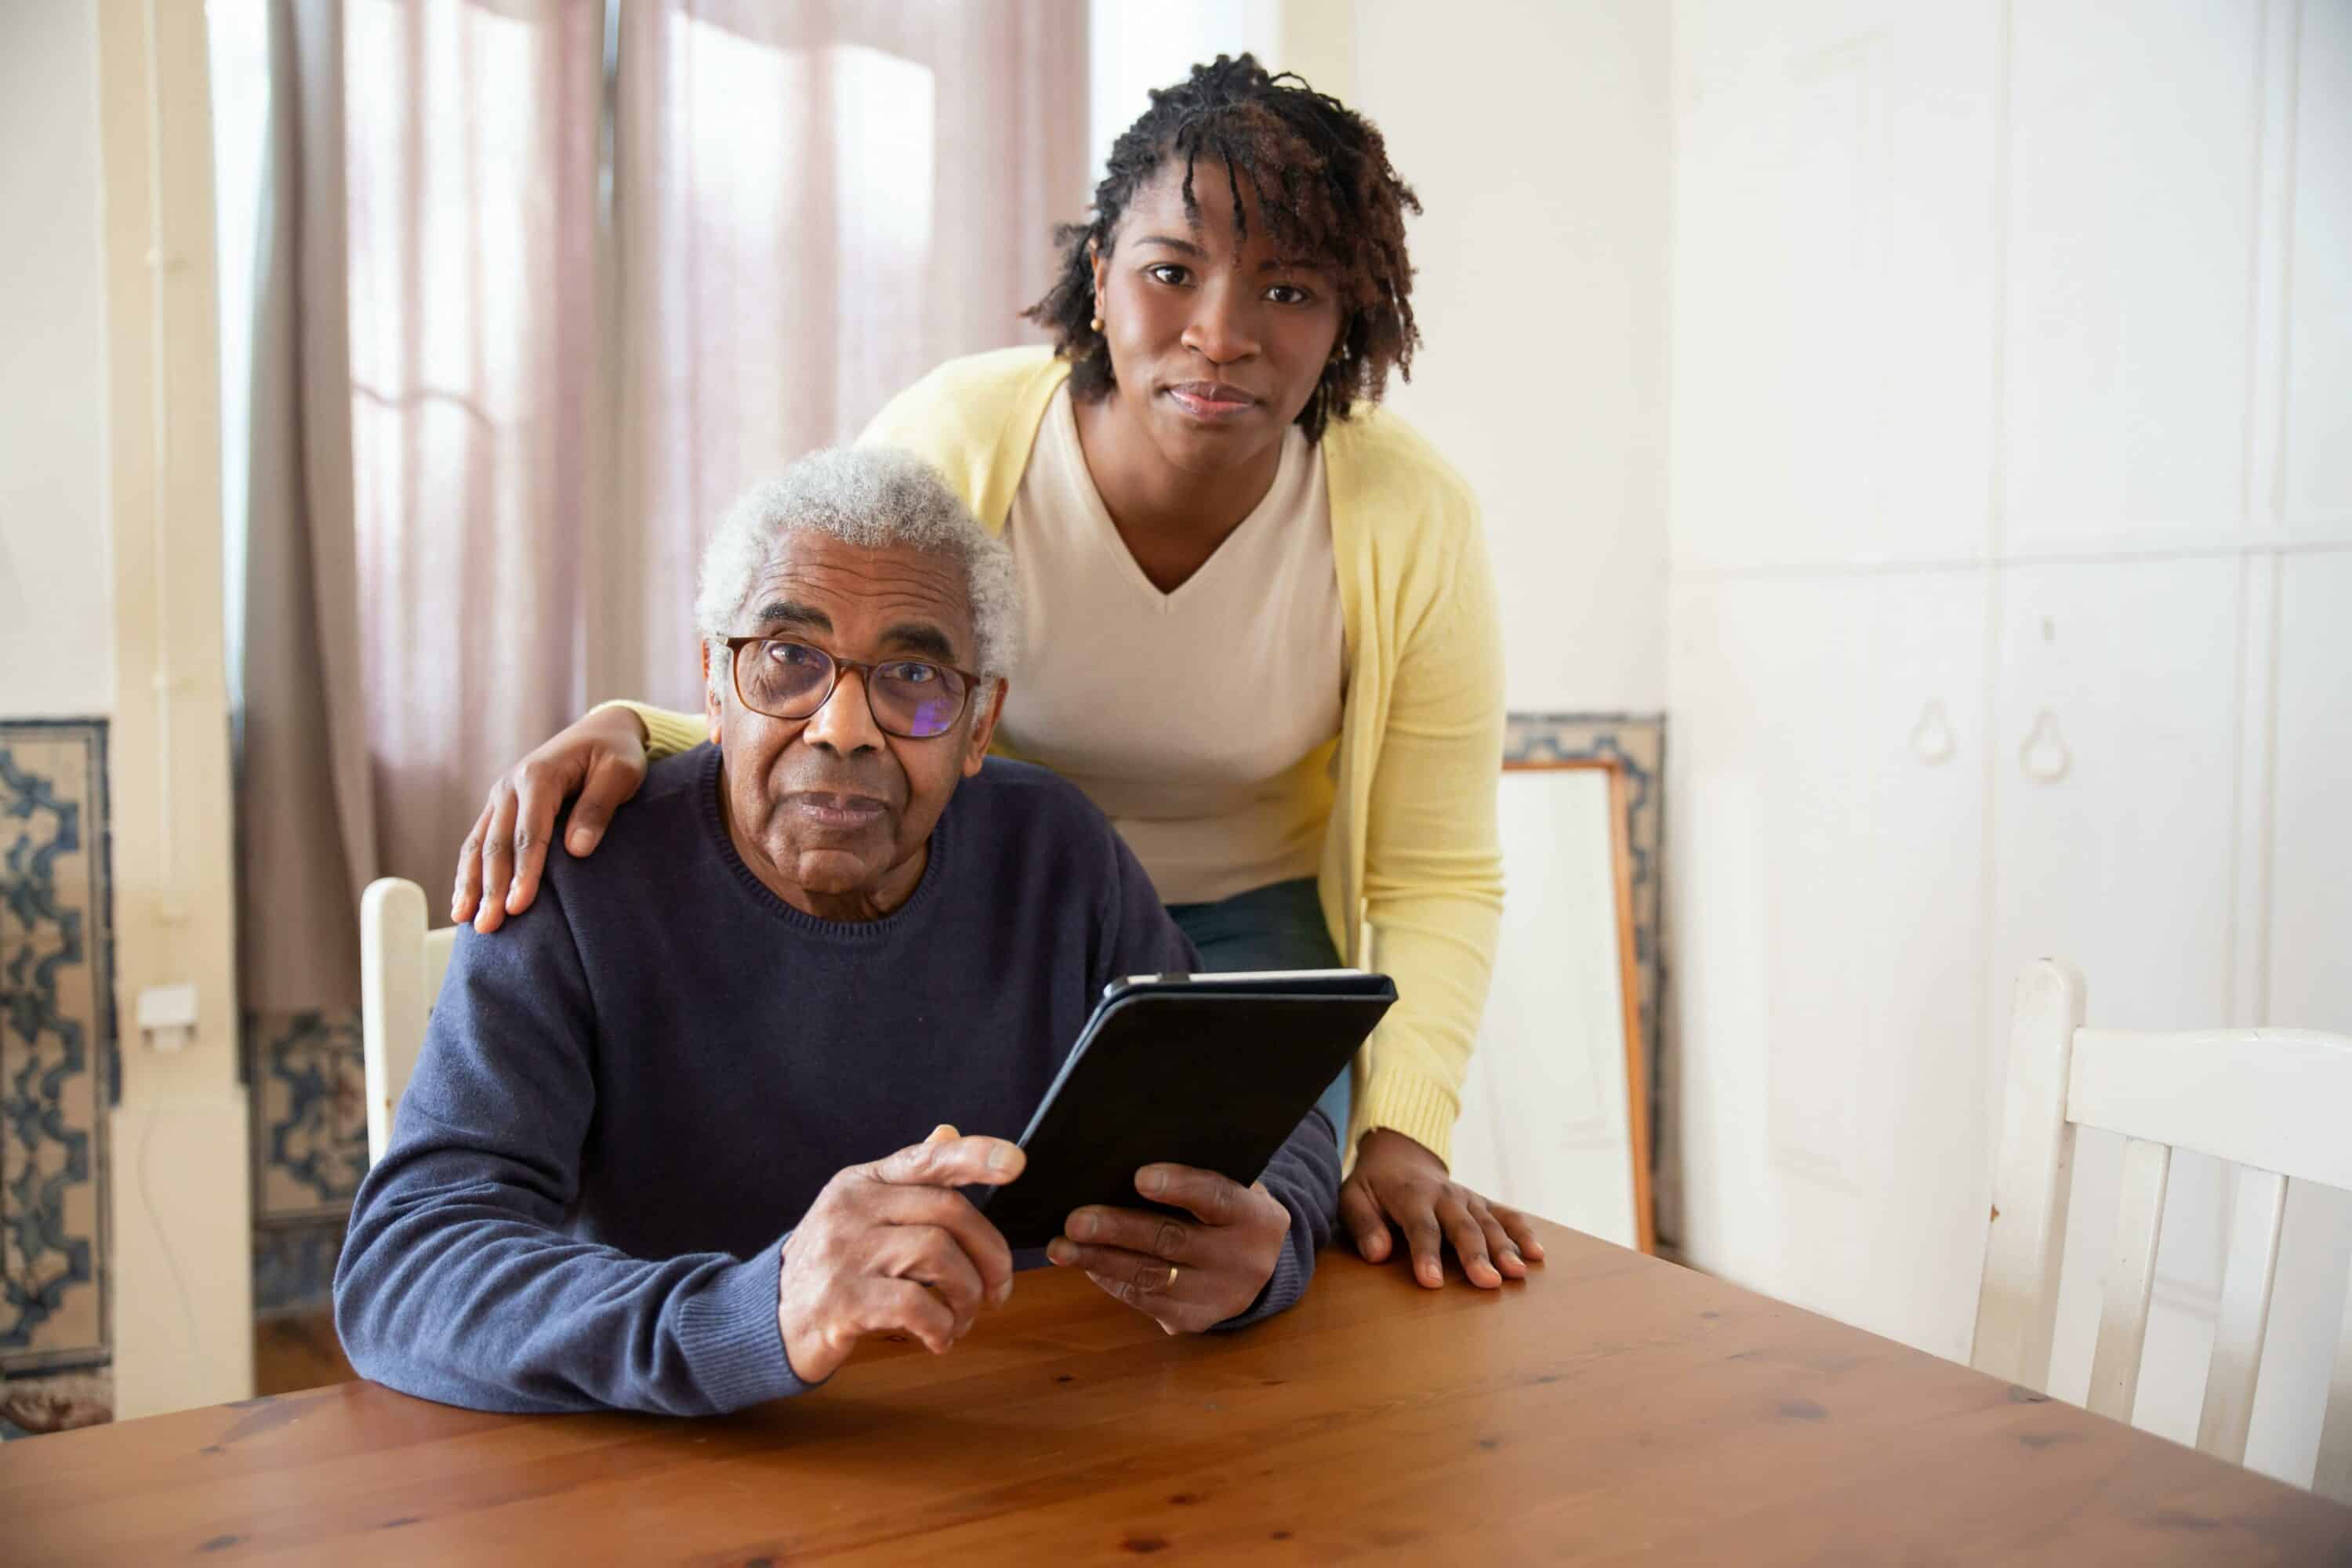 home help for seniors in australia - Benefits of In-Home Assistance